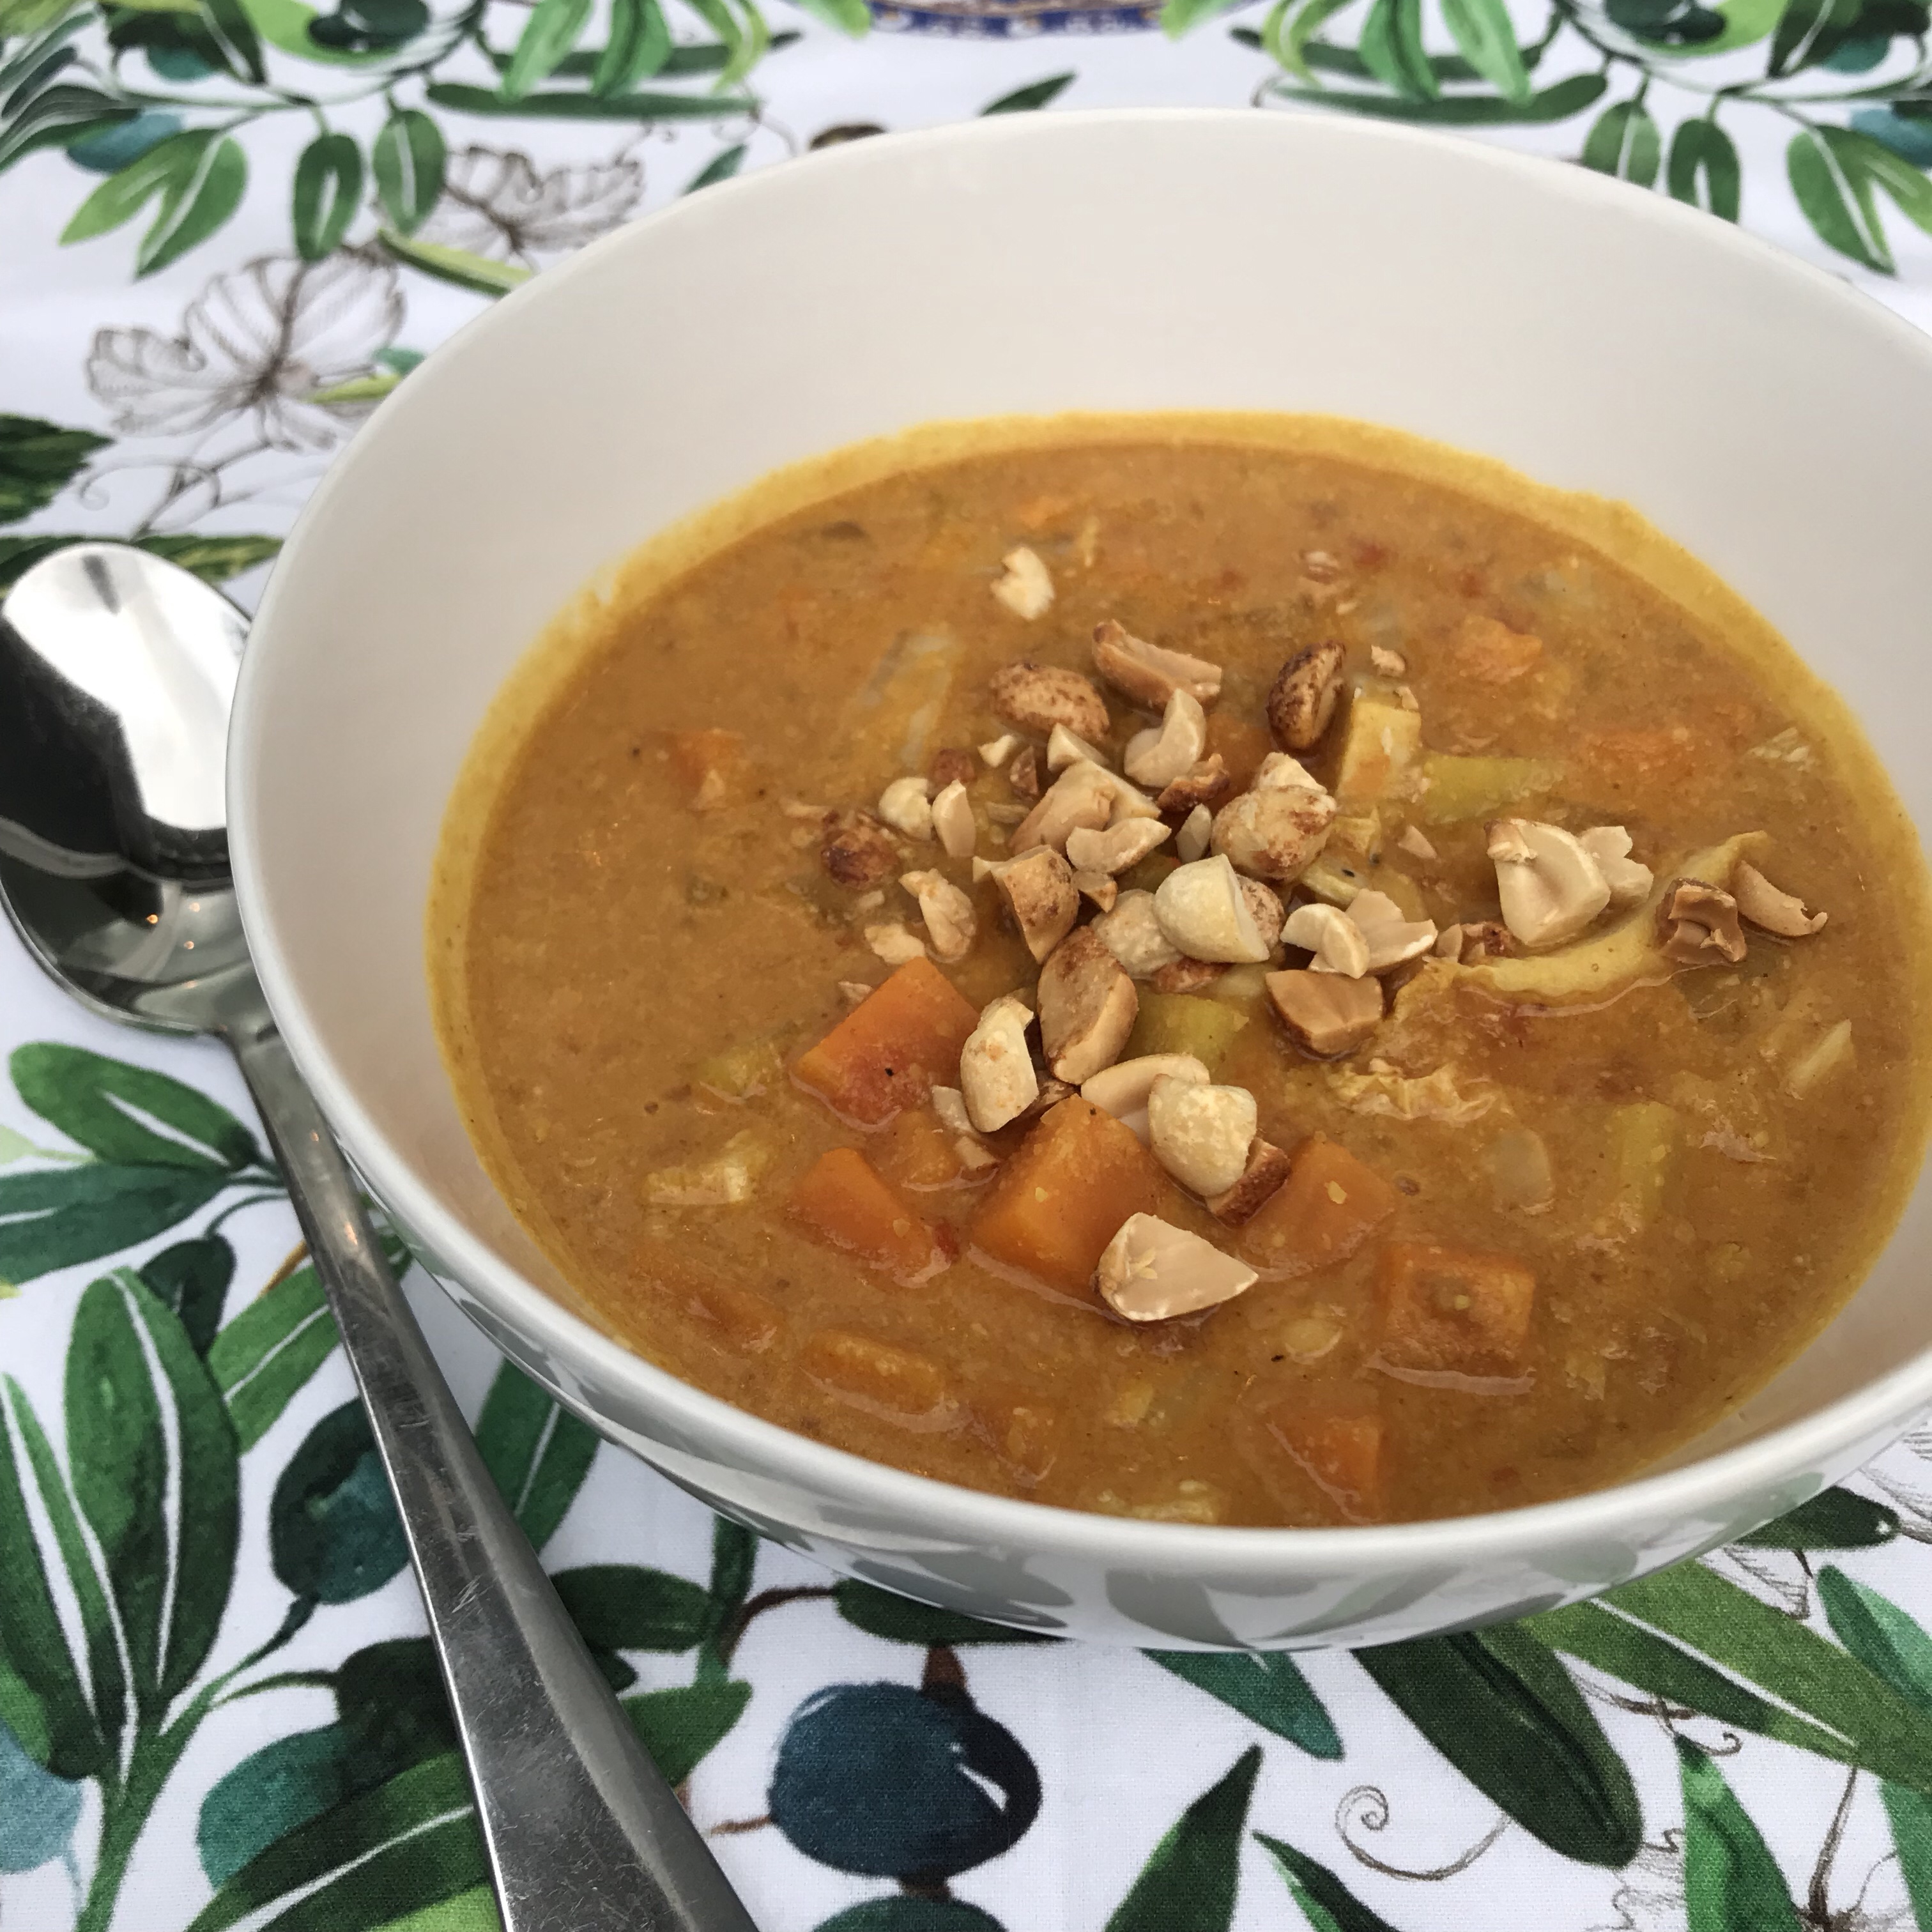 Malaysian Cabbage and Peanut Soup